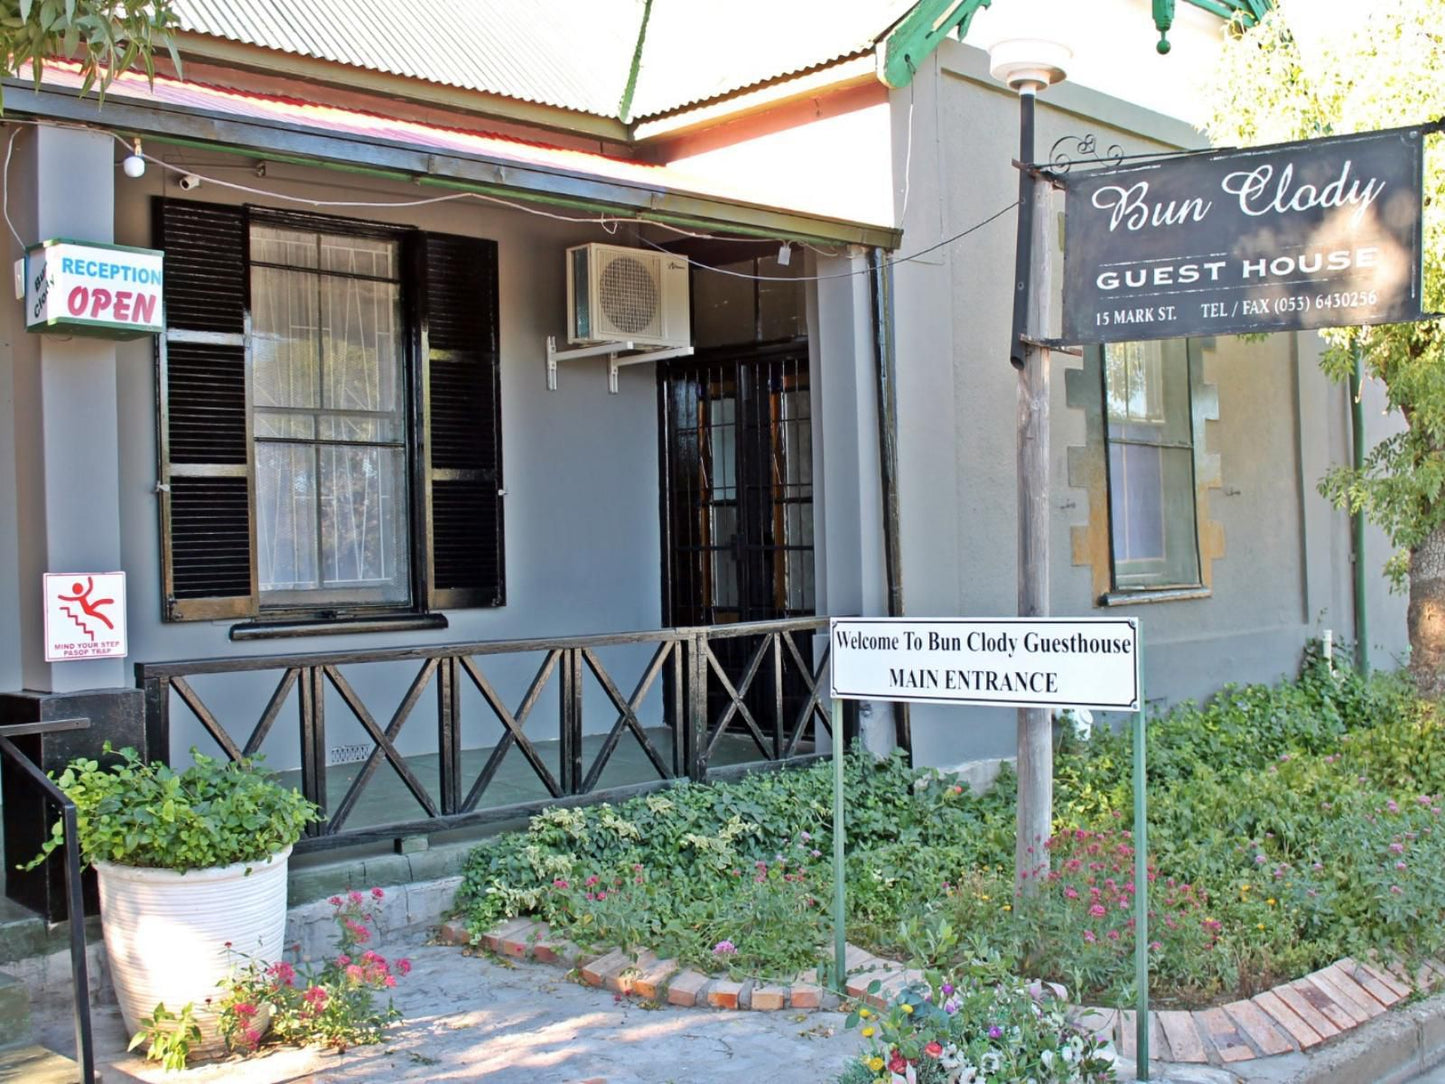 Bun Clody Guesthouse Hanover Northern Cape South Africa House, Building, Architecture, Sign